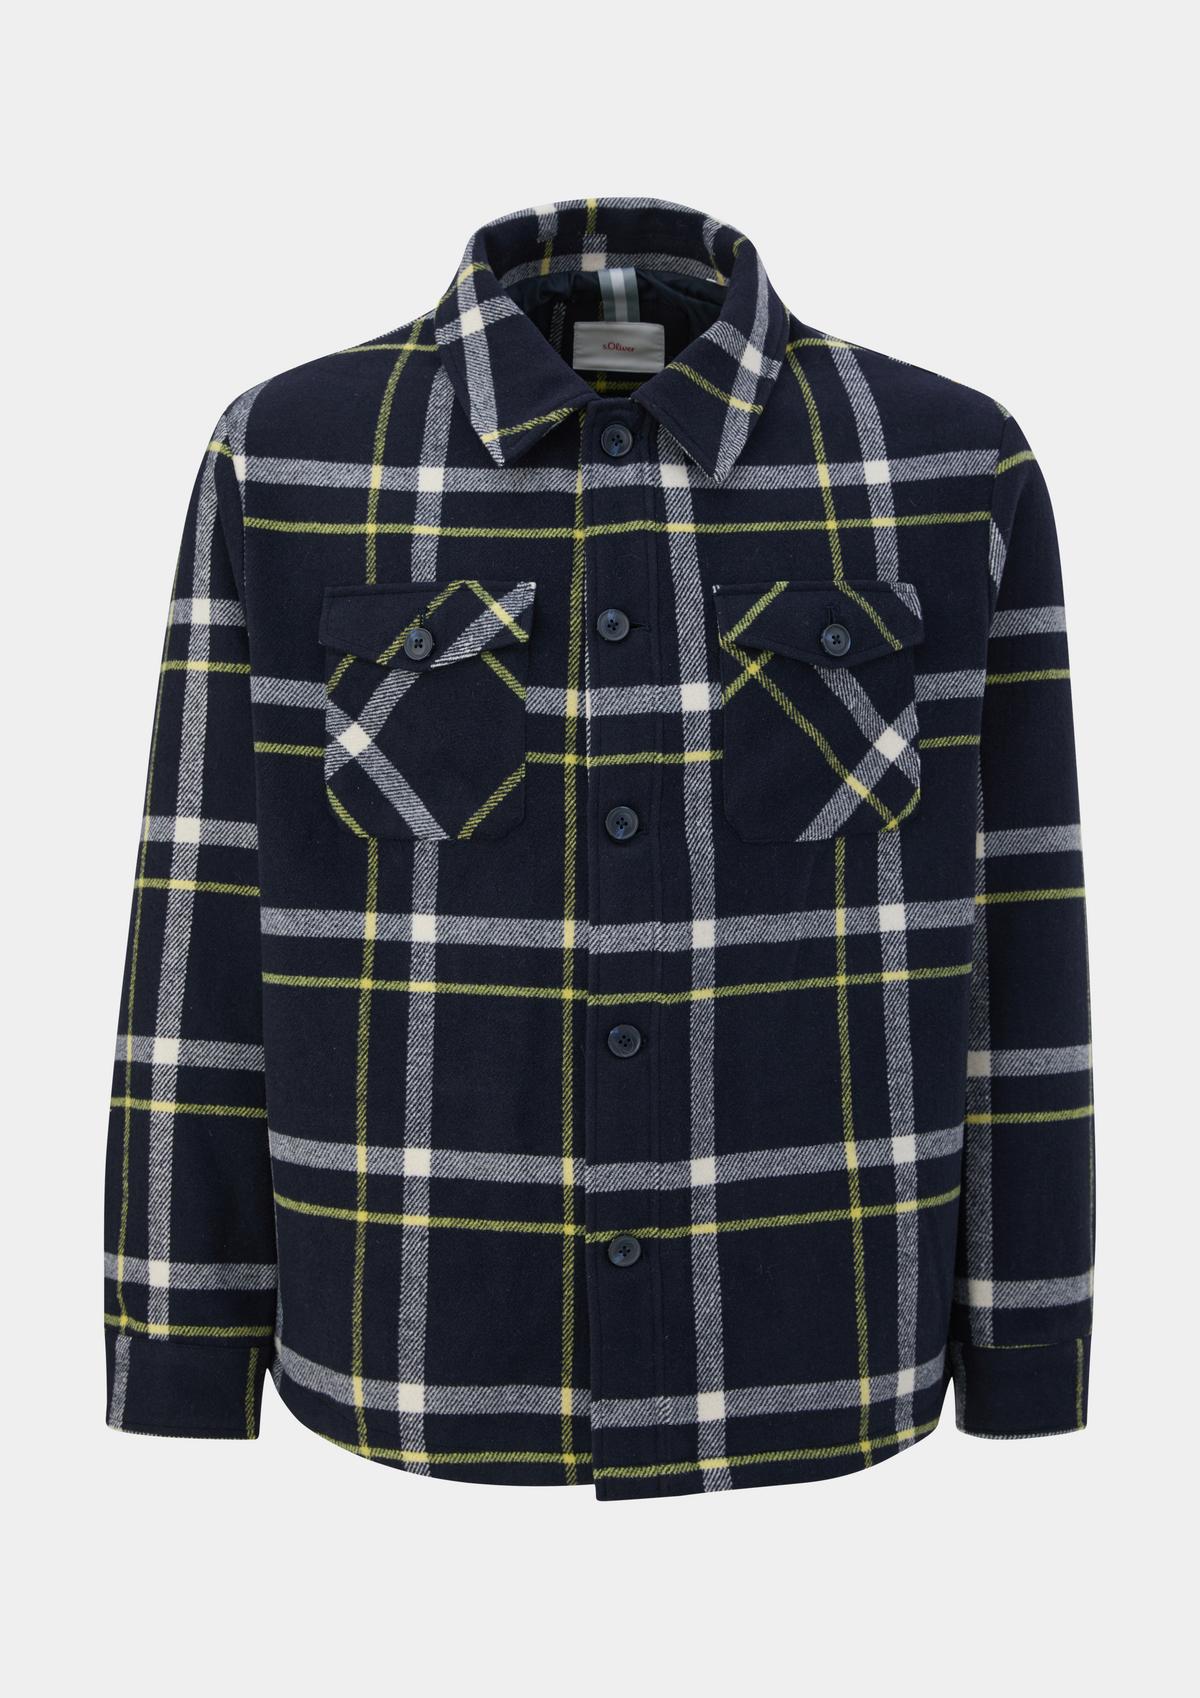 s.Oliver Overshirt in flannel fabric